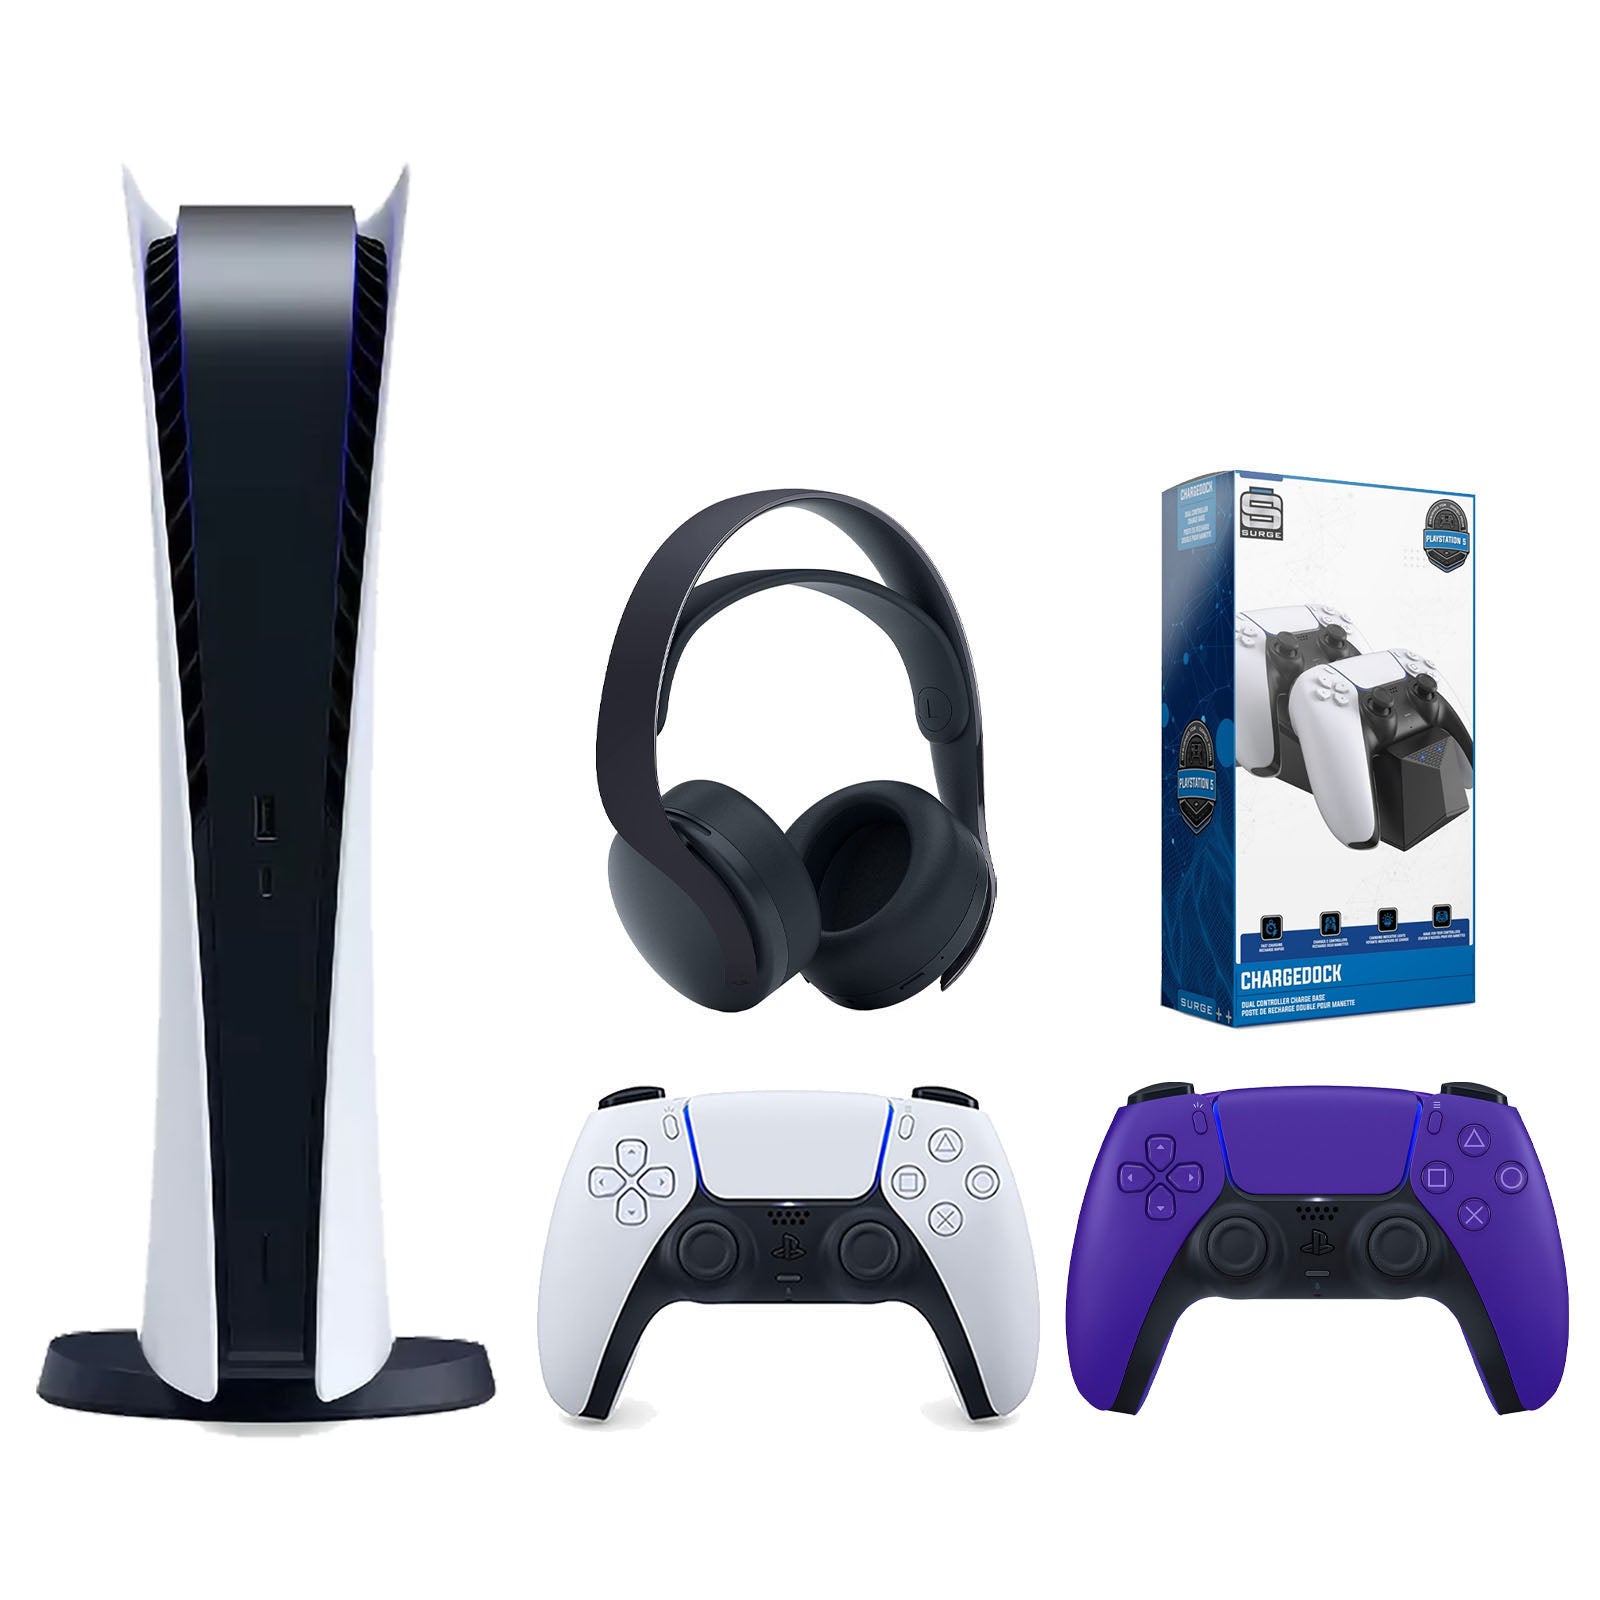 Sony Playstation 5 Digital Edition Console with Extra Purple Controller, Black PULSE 3D Headset and Surge Dual Controller Charge Dock Bundle - Pro-Distributing